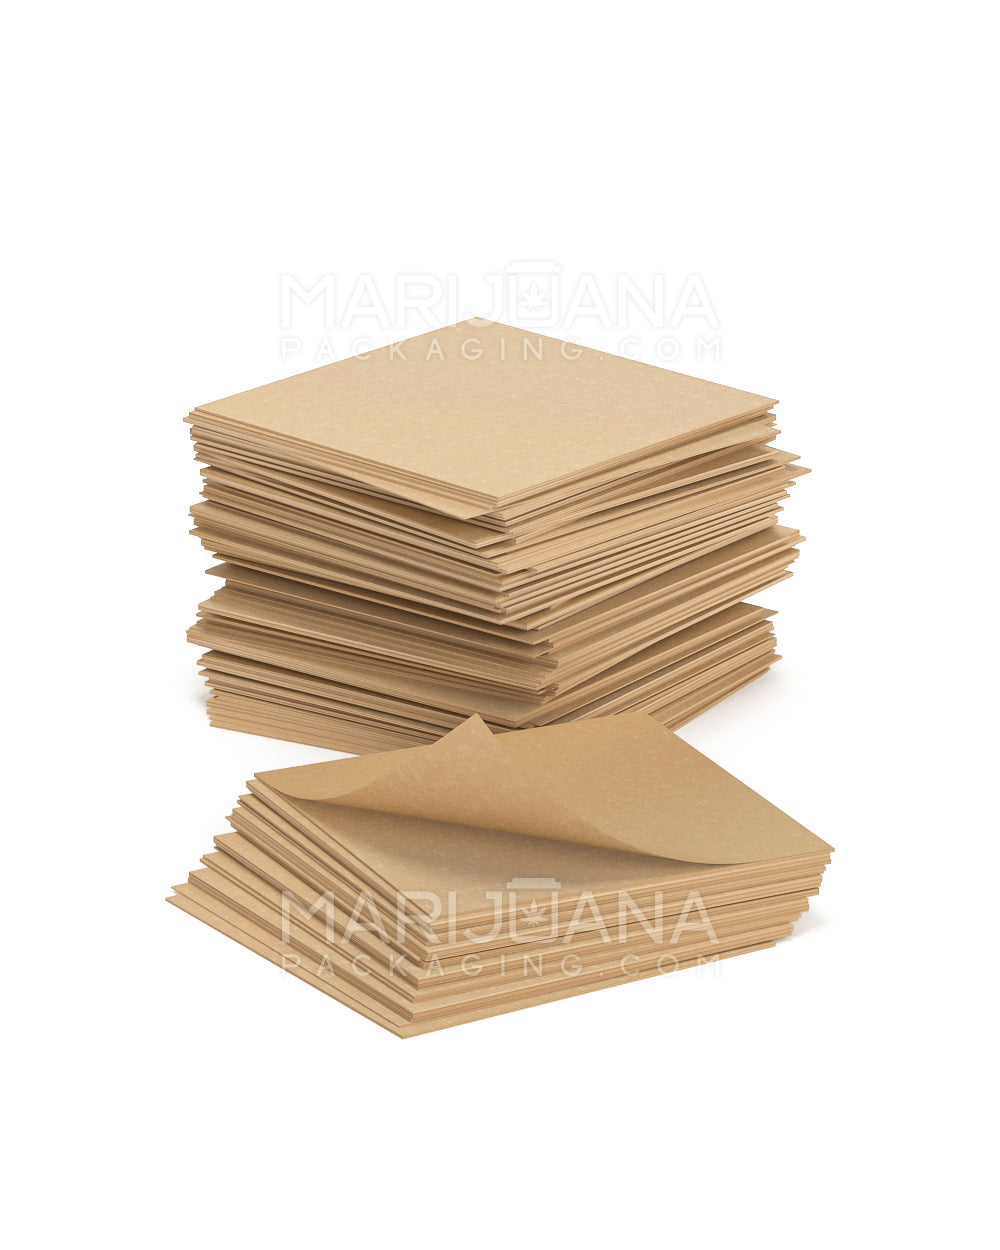 Non Silicone Coated Parchment Paper | 5in x 5in - Natural Brown - 1000 Count - 4